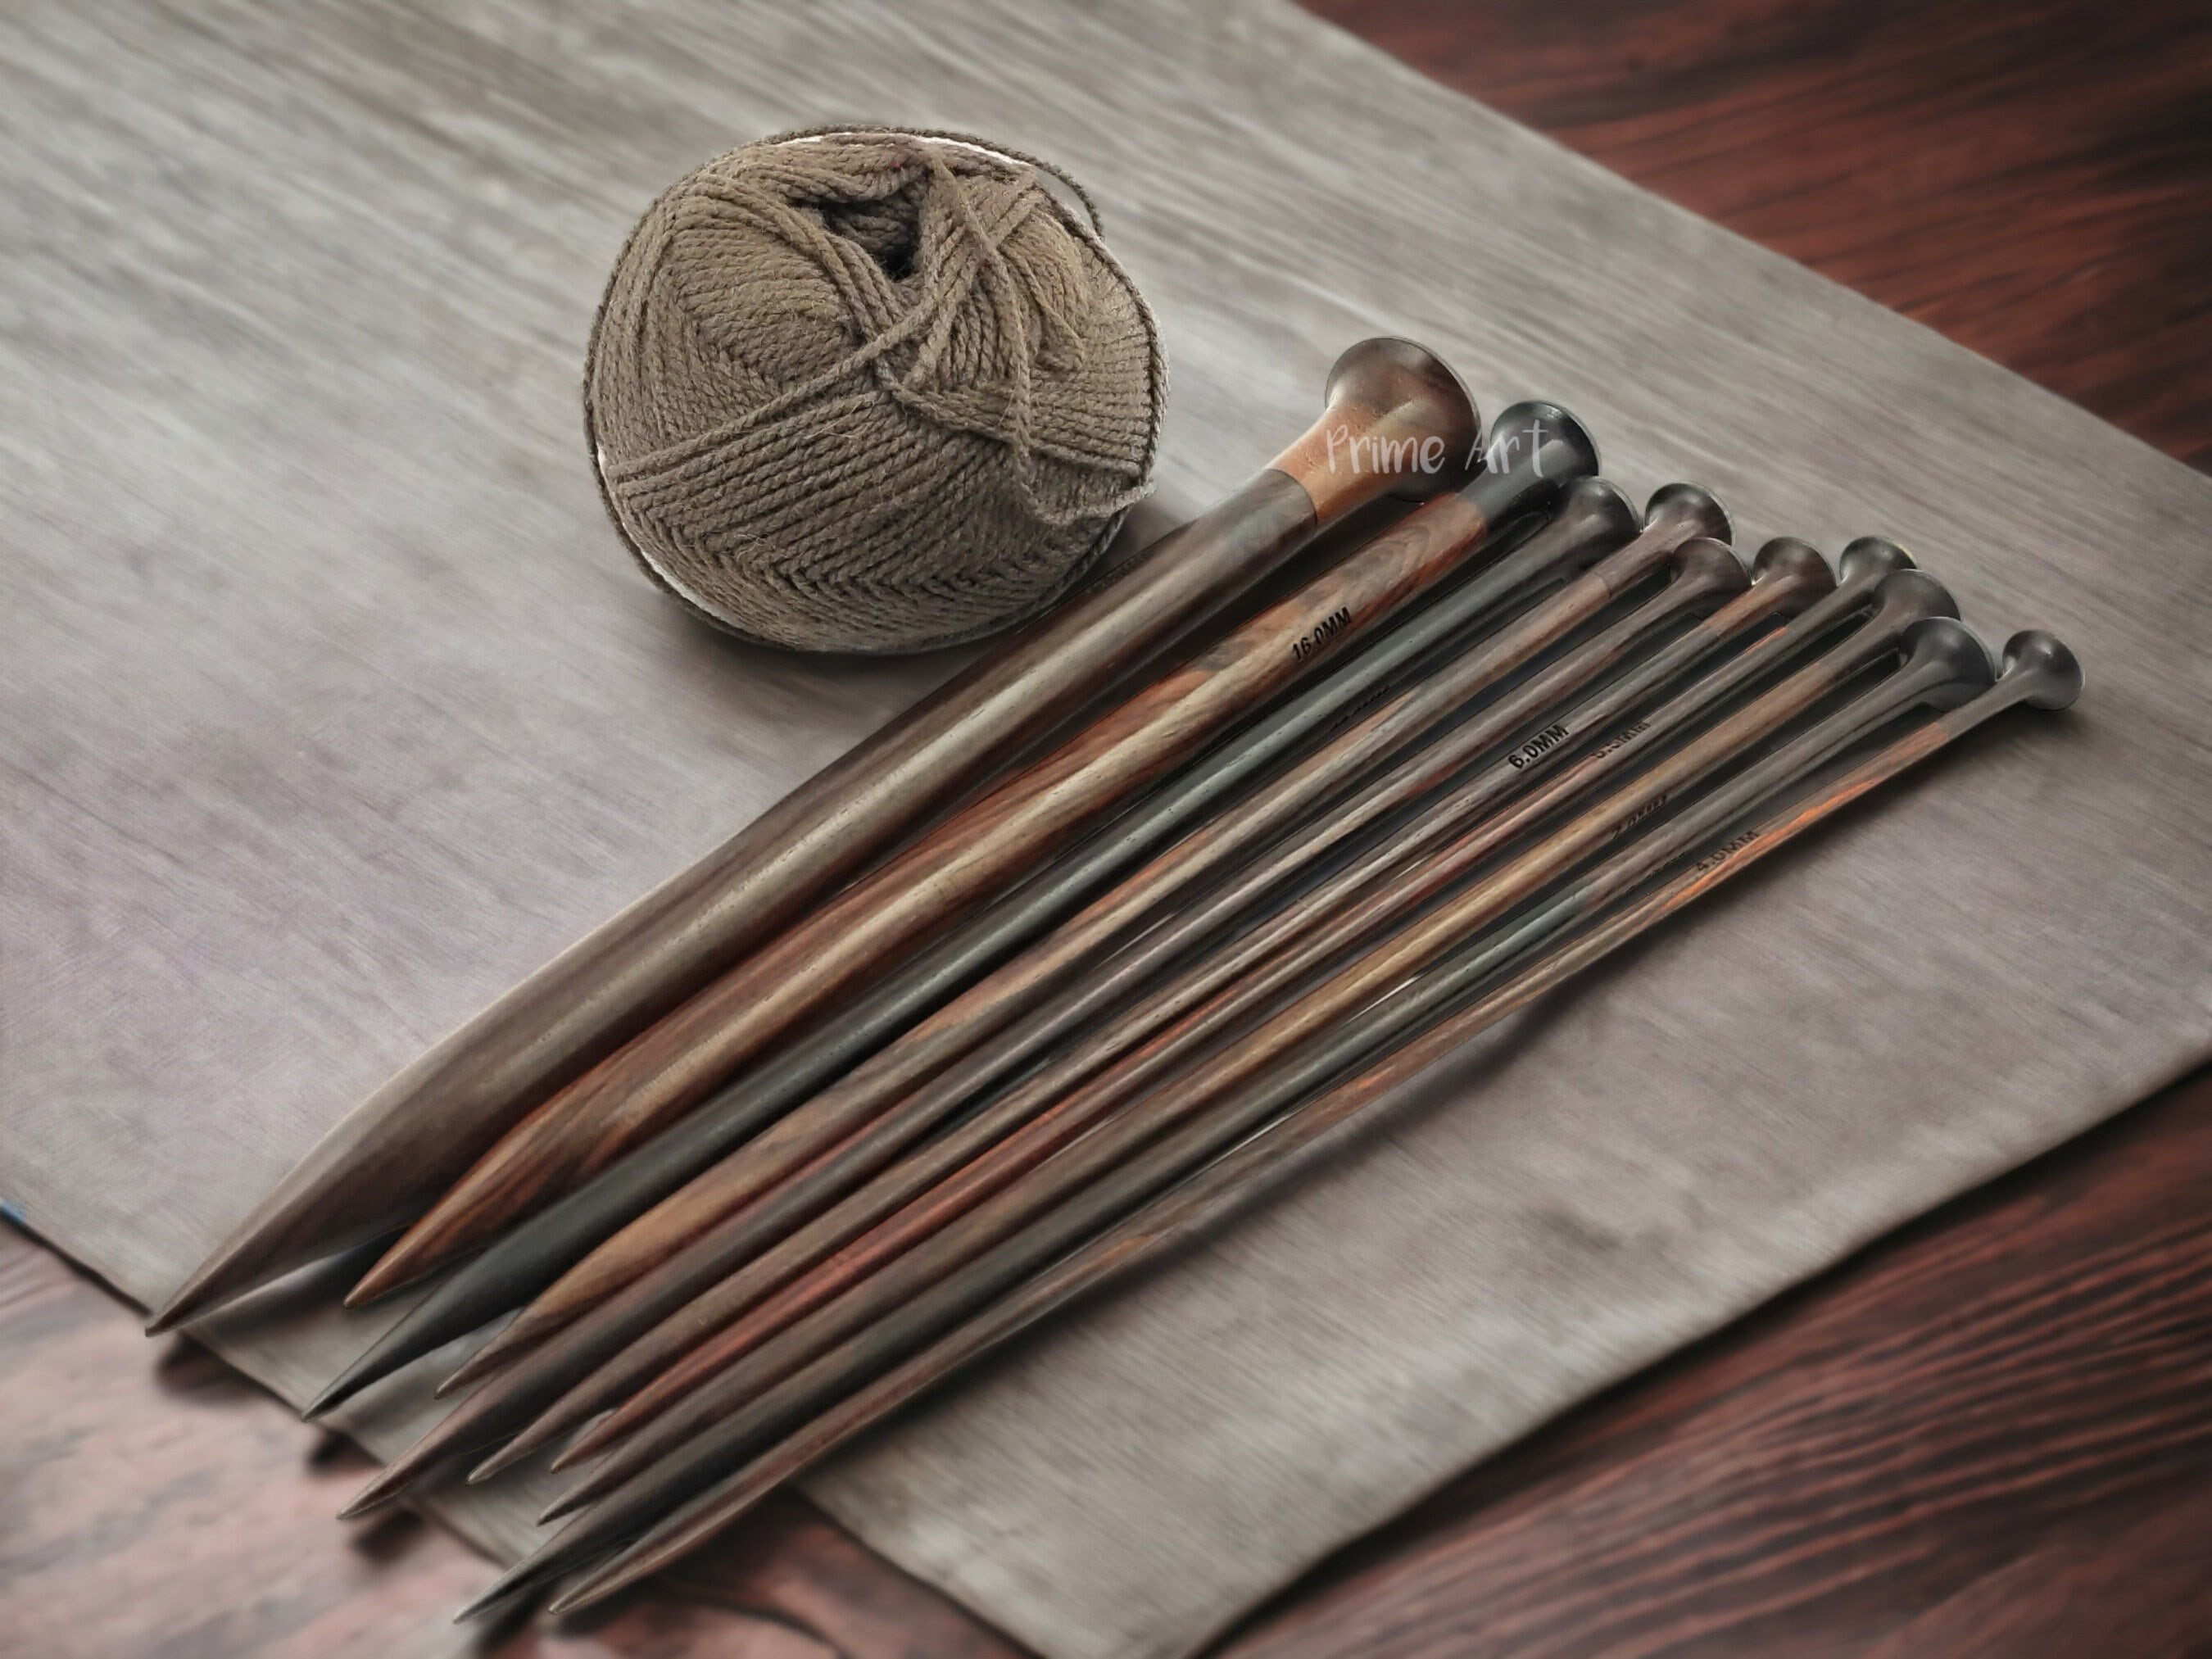 Rosewood Knitting Needles, Single Point, 10 inches - Brush Creek Wool Works